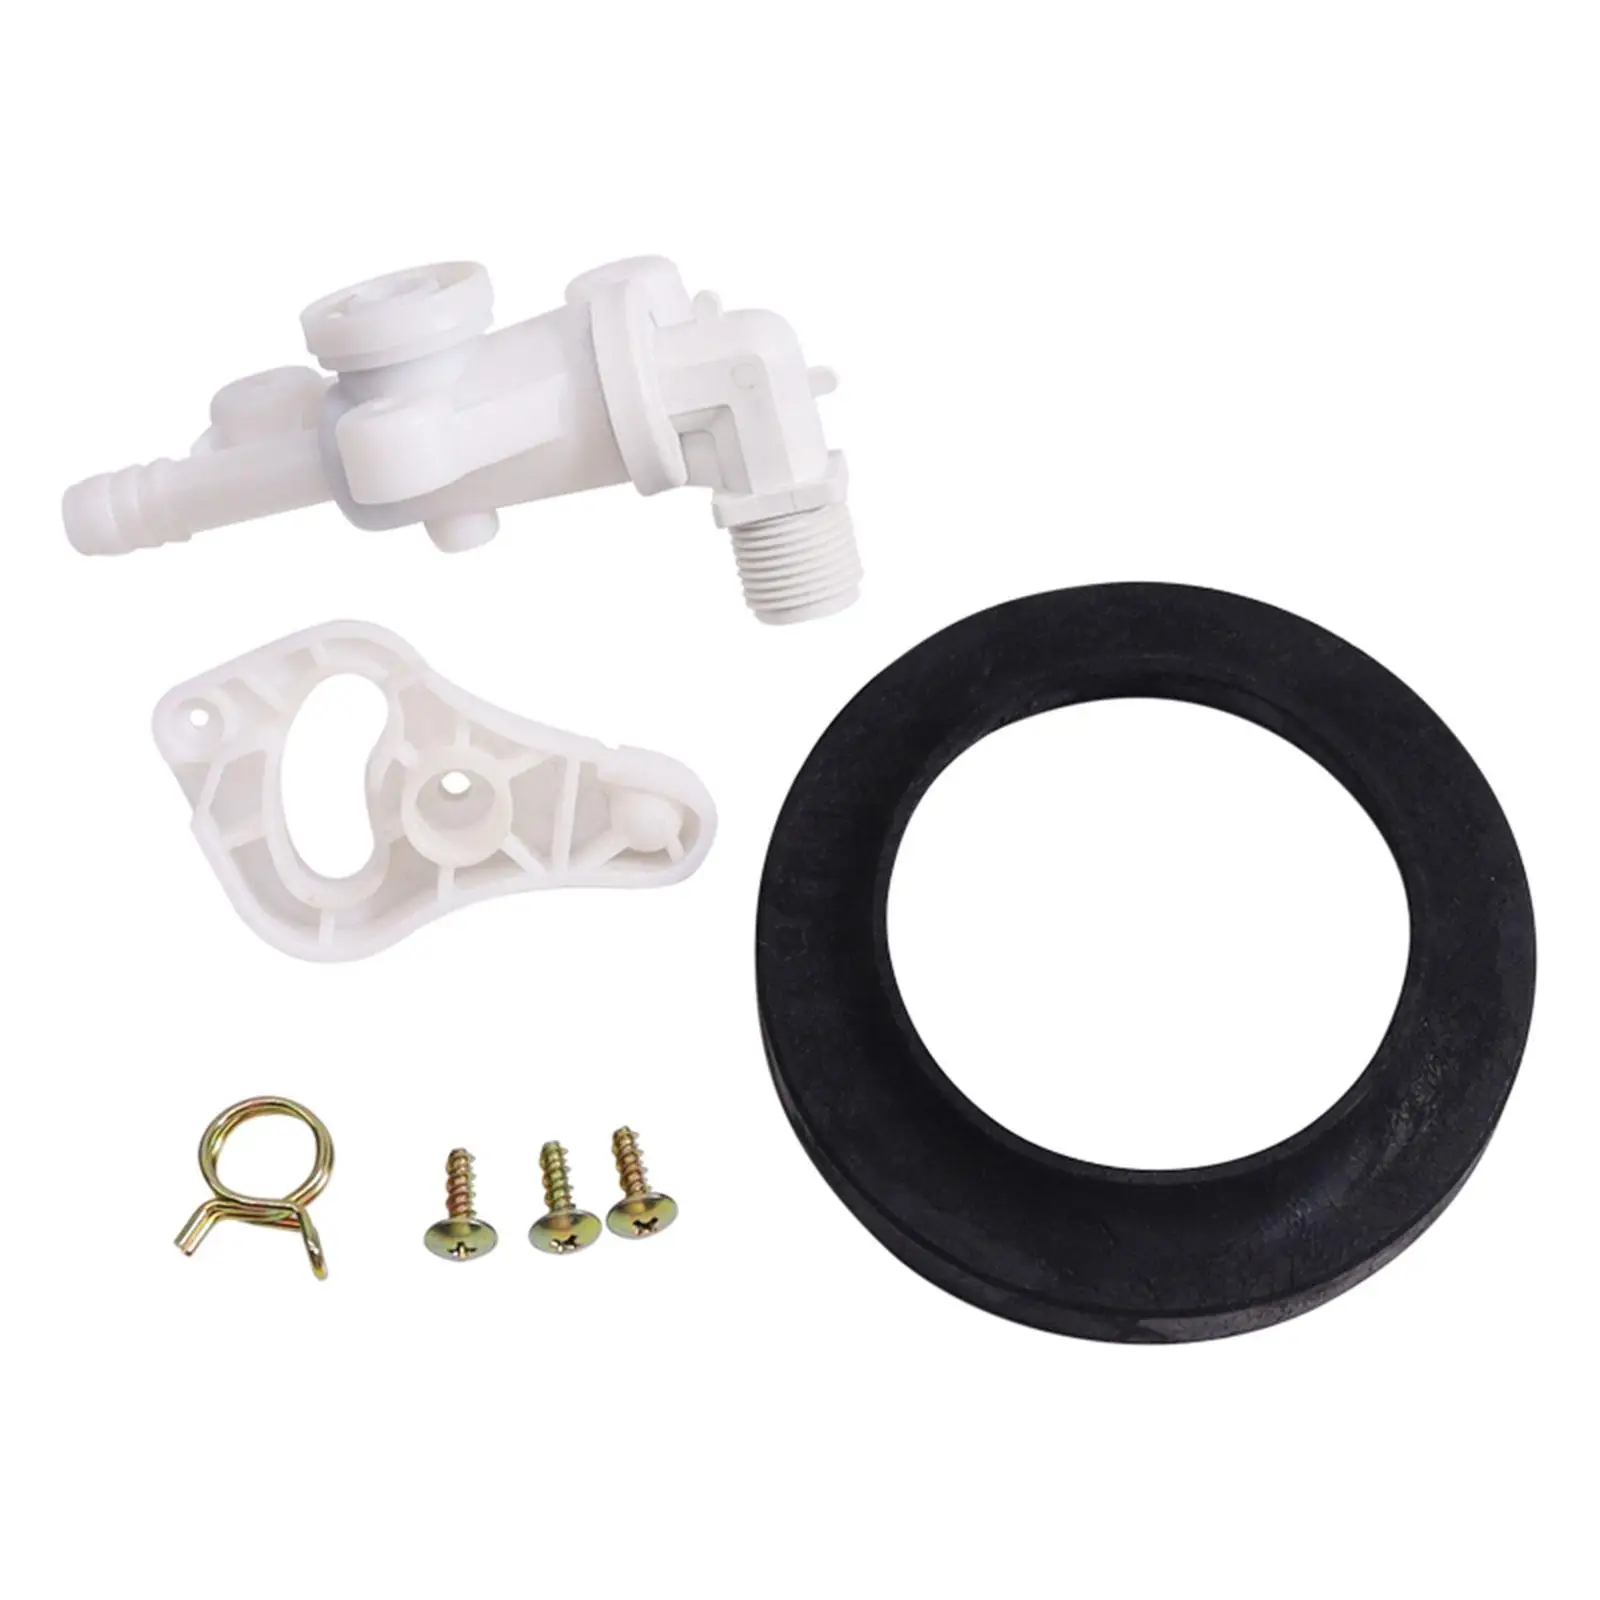 34100 Water Valve for Style Plus Toilets Replace Parts Accessory for Easy to Install Convenient Practical Durable